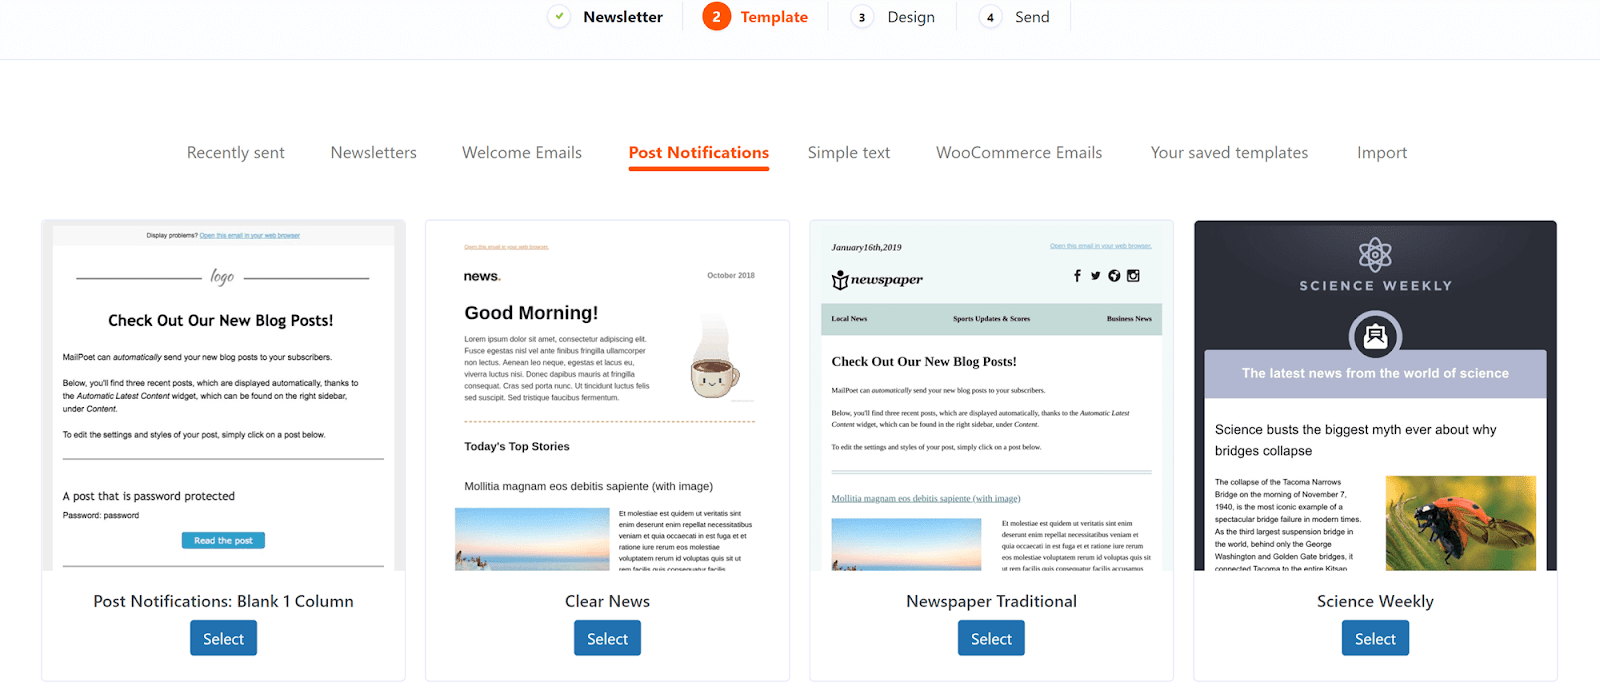 Newsletters, welcome emails, and latest post notifications: Latest post notification templates